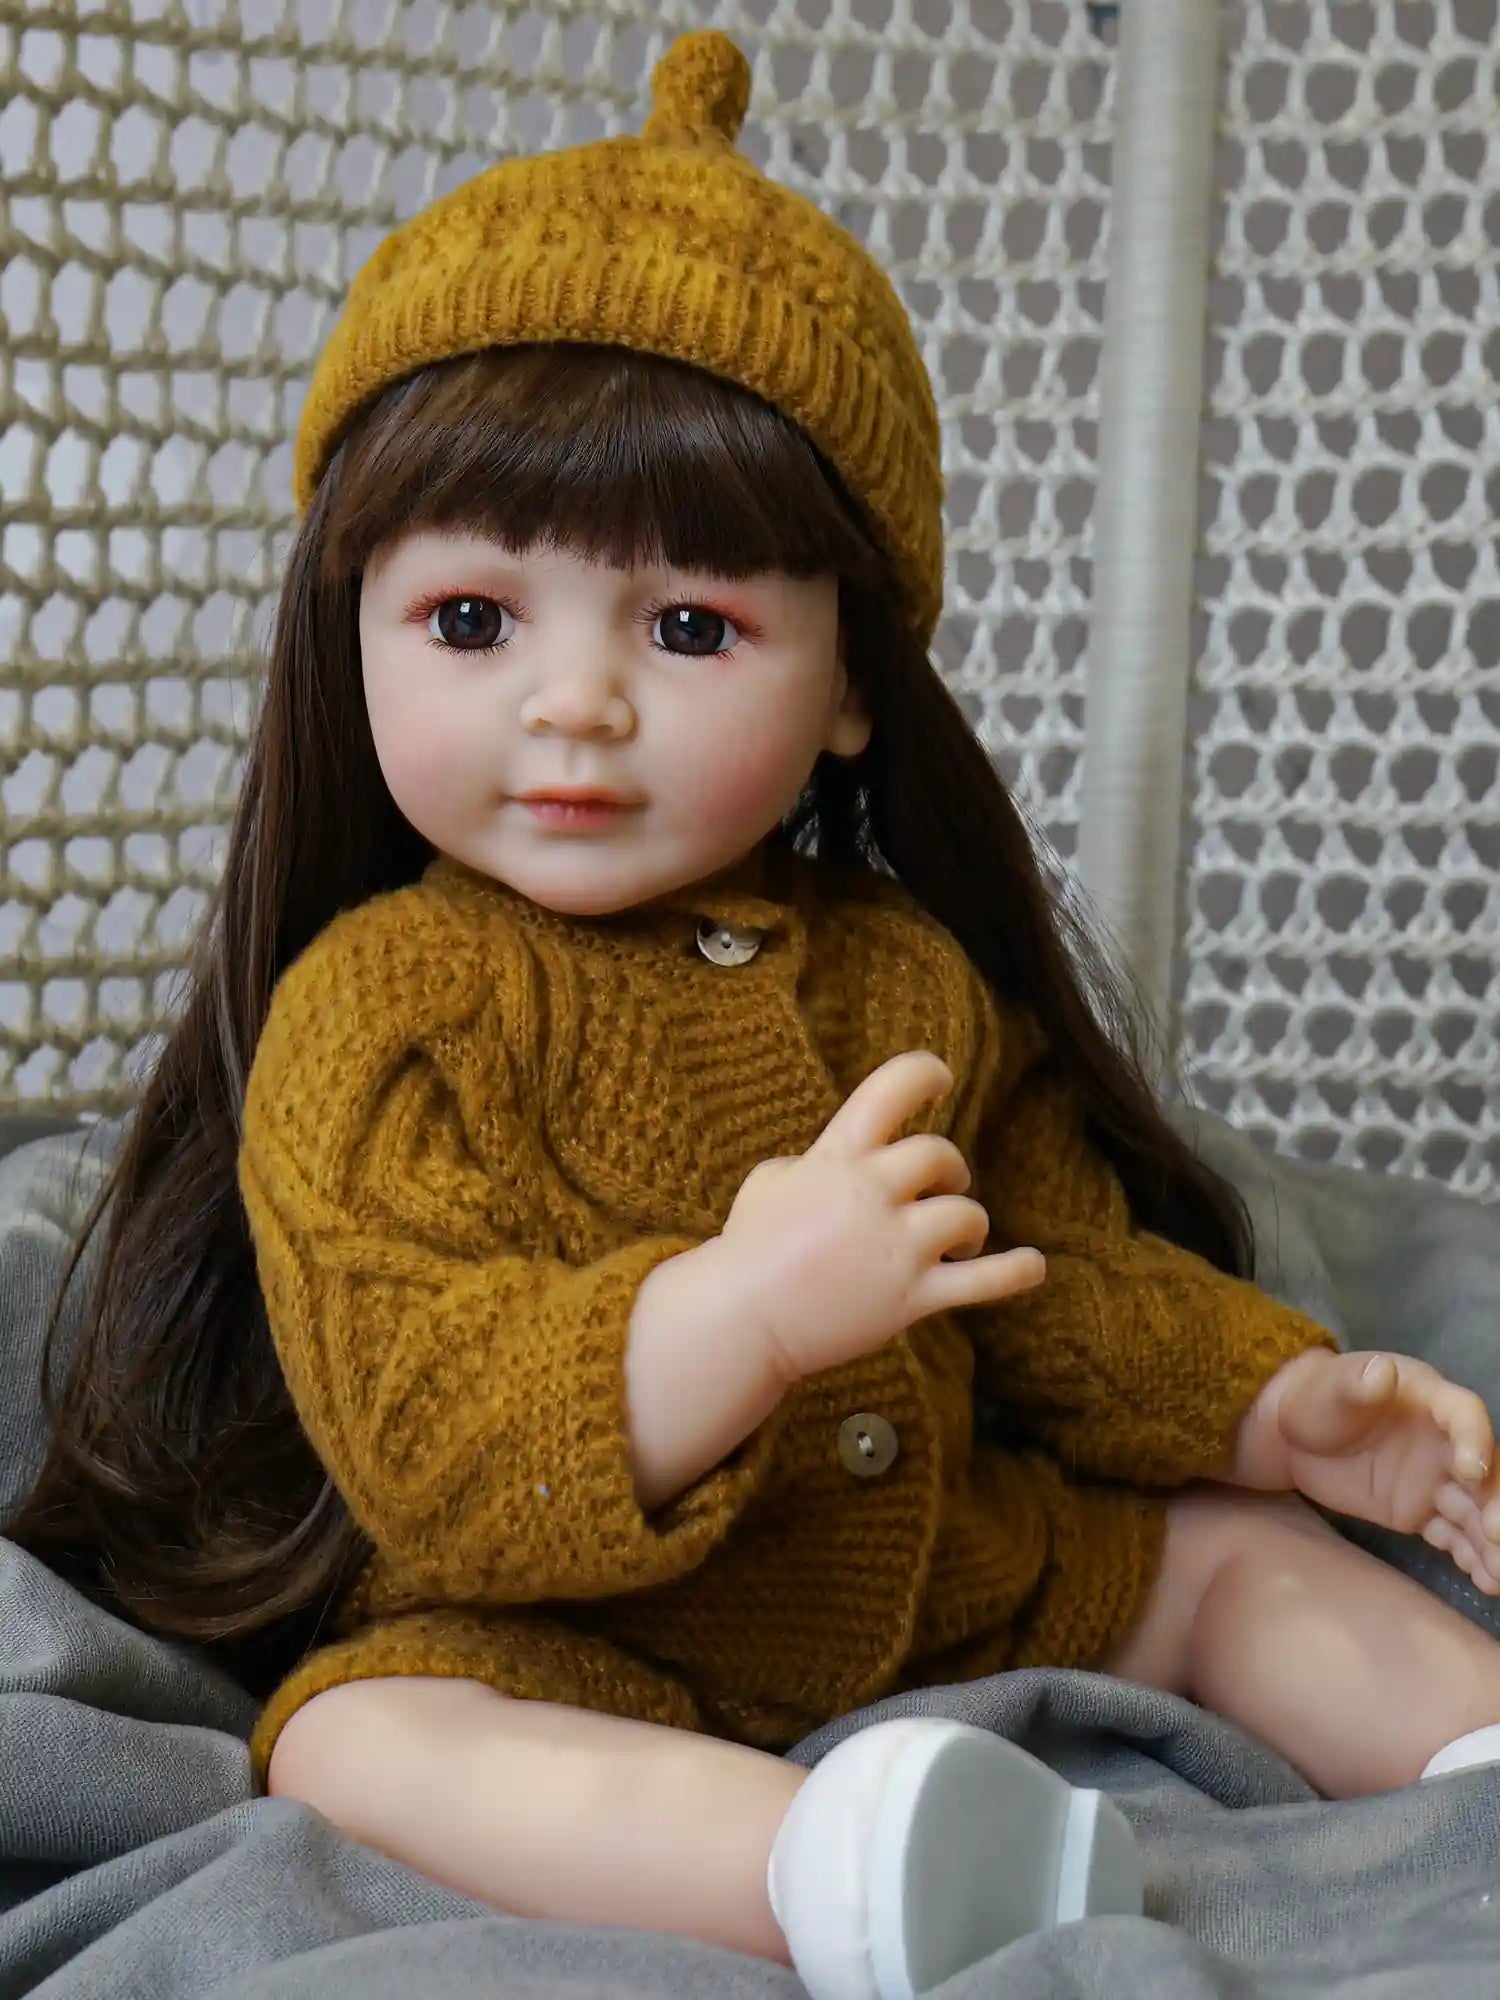 A doll with a realistic childlike demeanor, donning a mustard knit hat and sweater, capturing a relaxed pose on a comfortable gray textile.